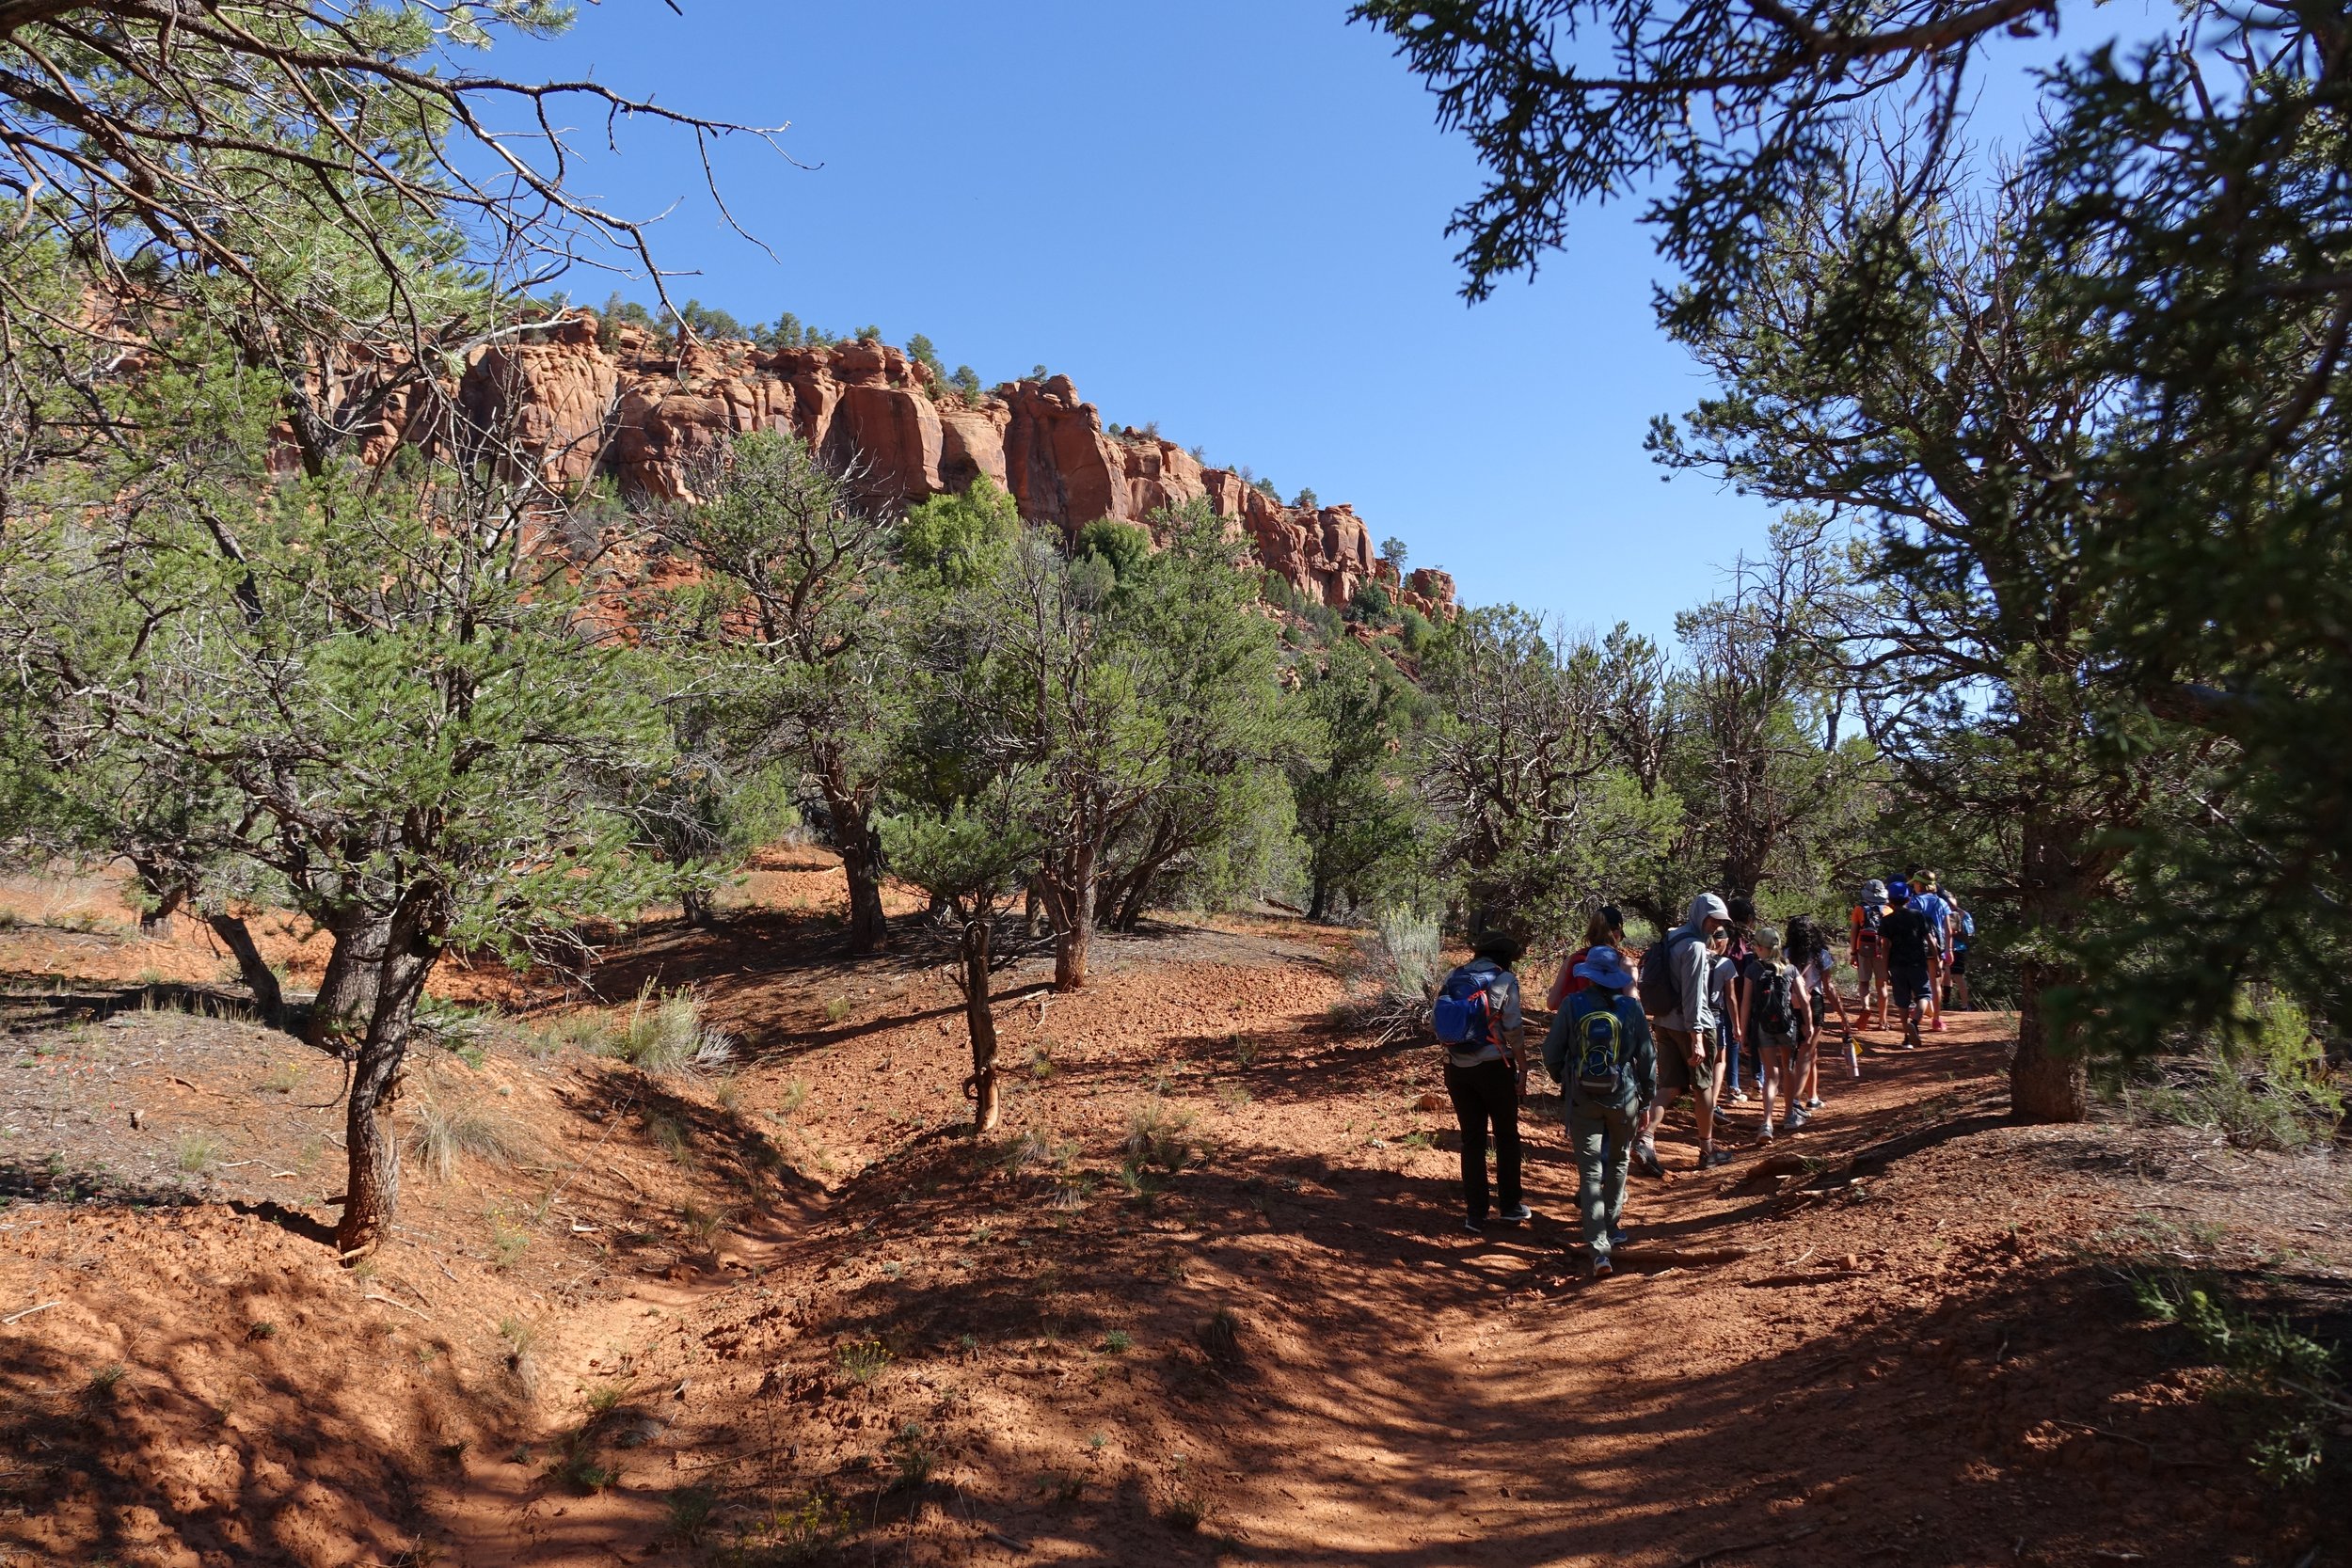  The students went on a hike into the Dominguez Canyon Wilderness. After learning the Leave No Trace principles in Spanish, the 5th graders were ready to take on the trail.  